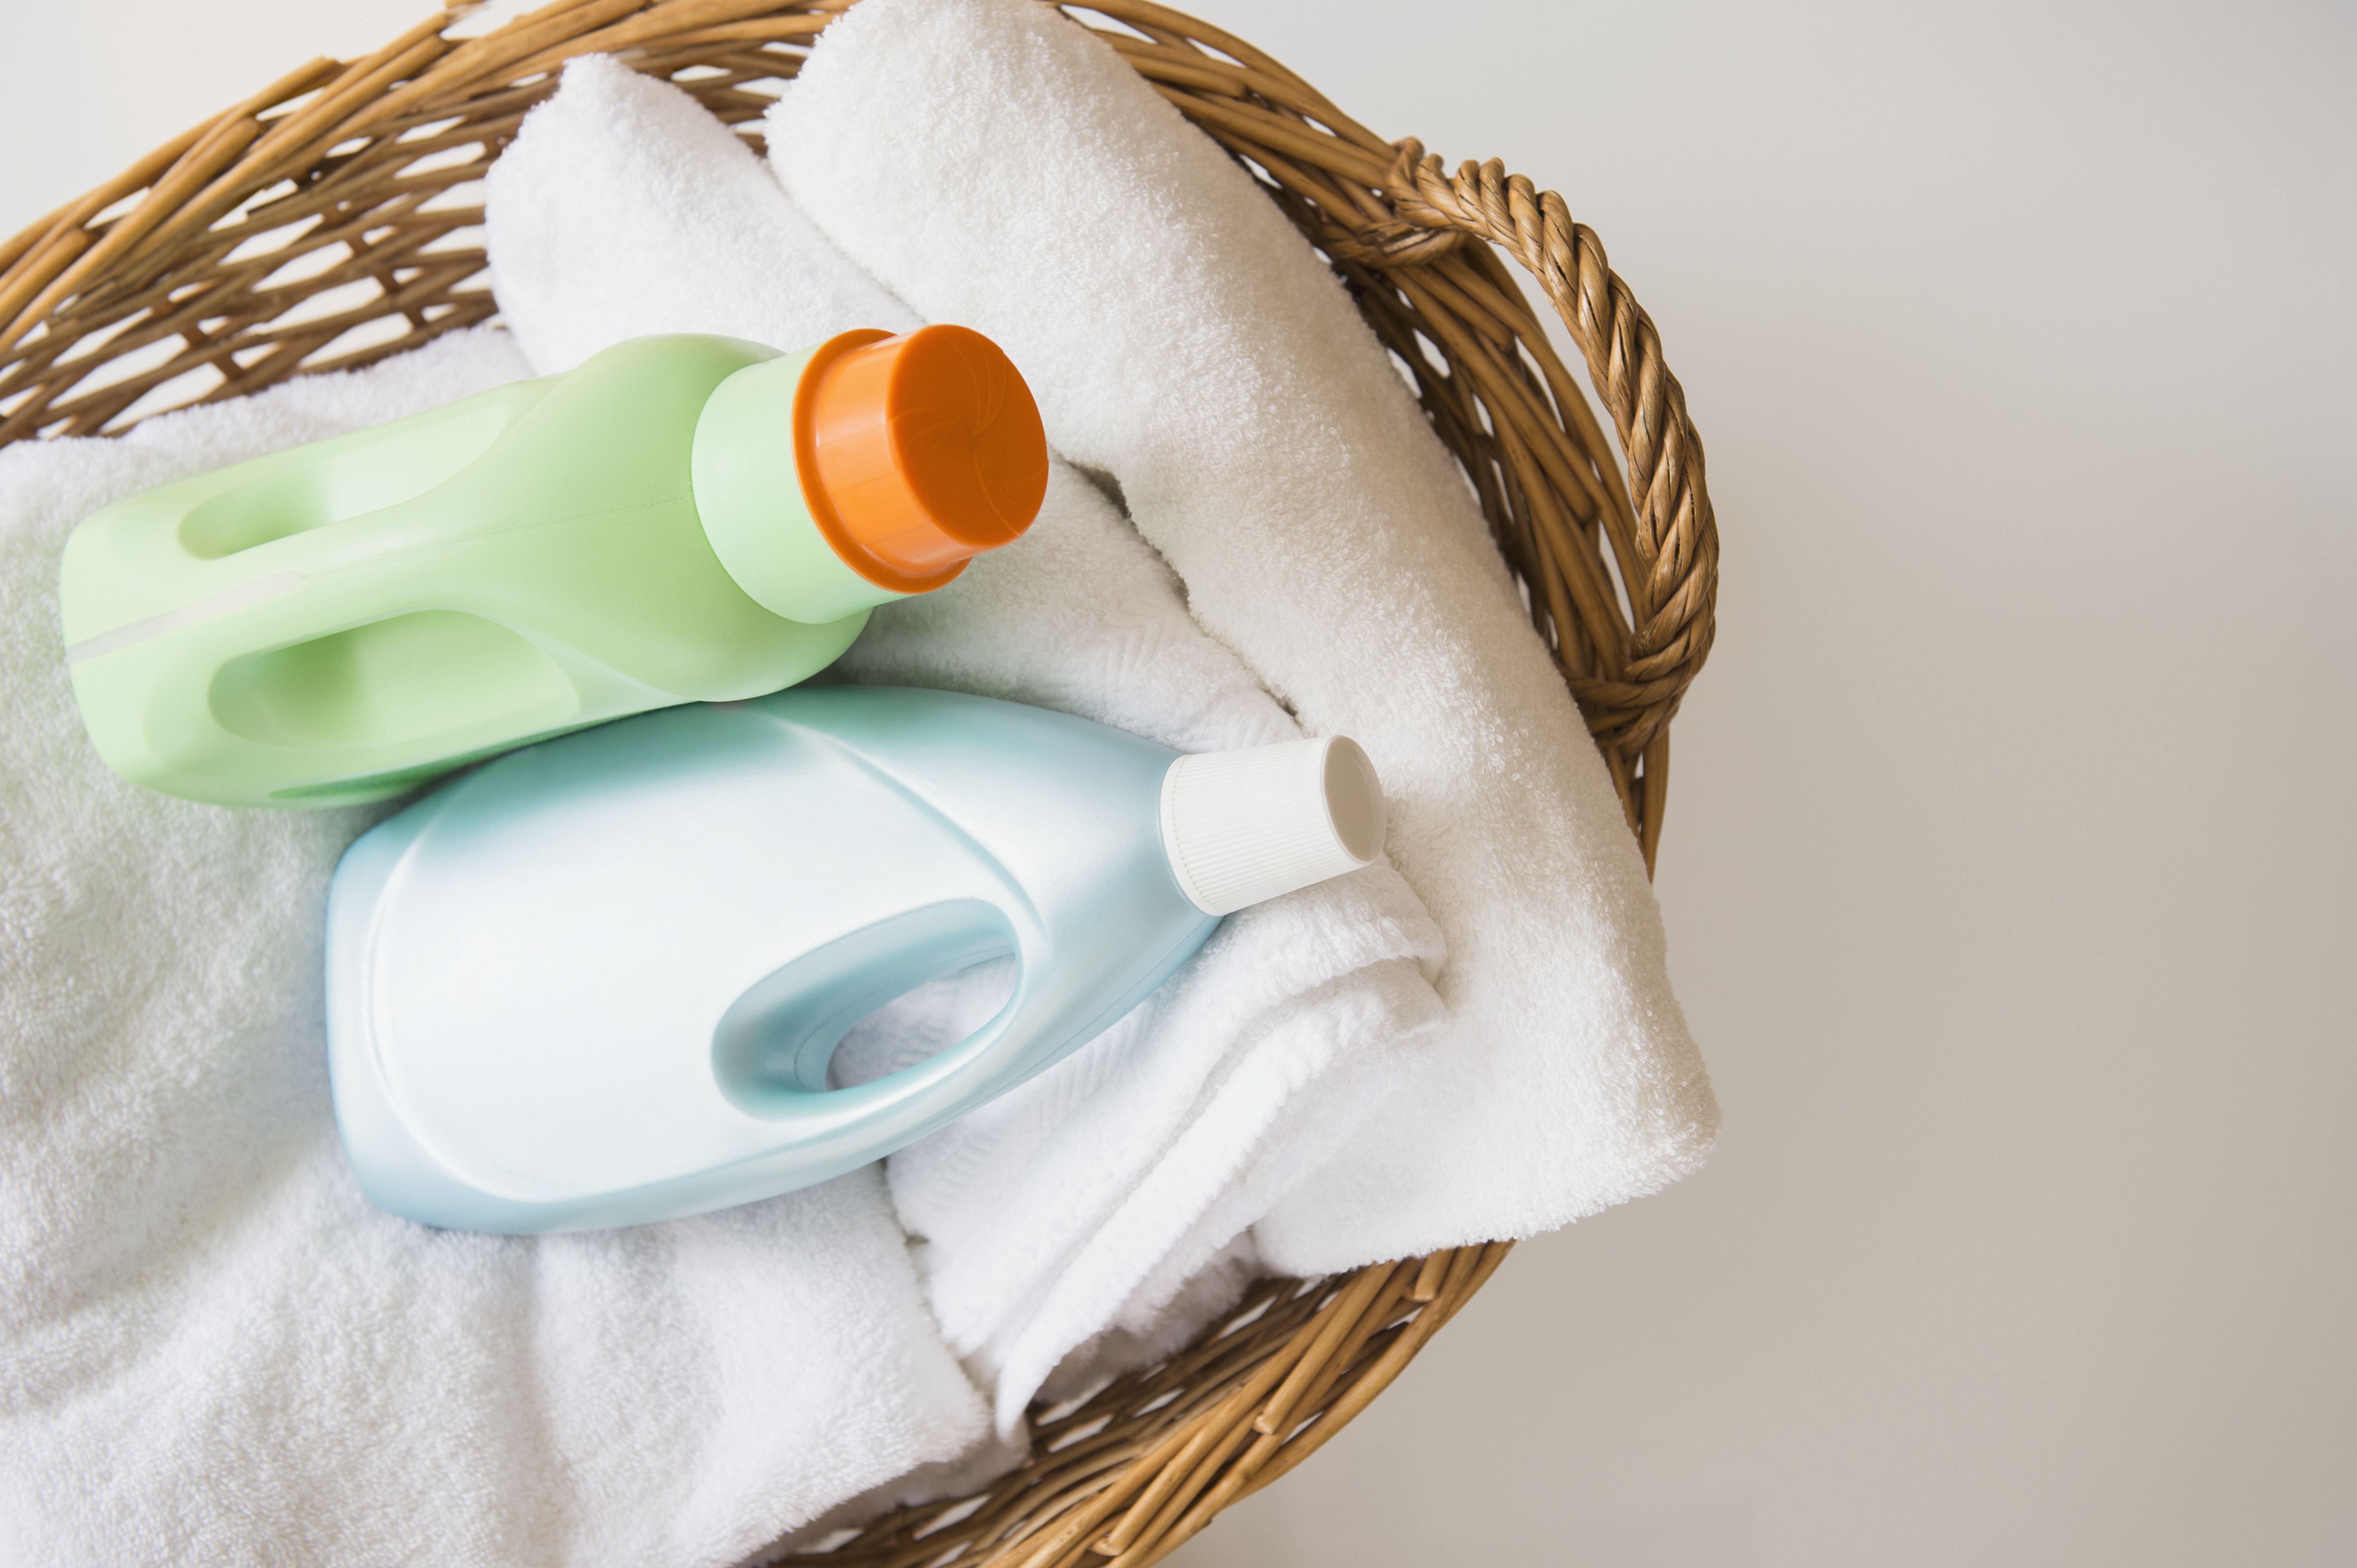 Is Your Laundry Routine Making Your Allergies Worse?